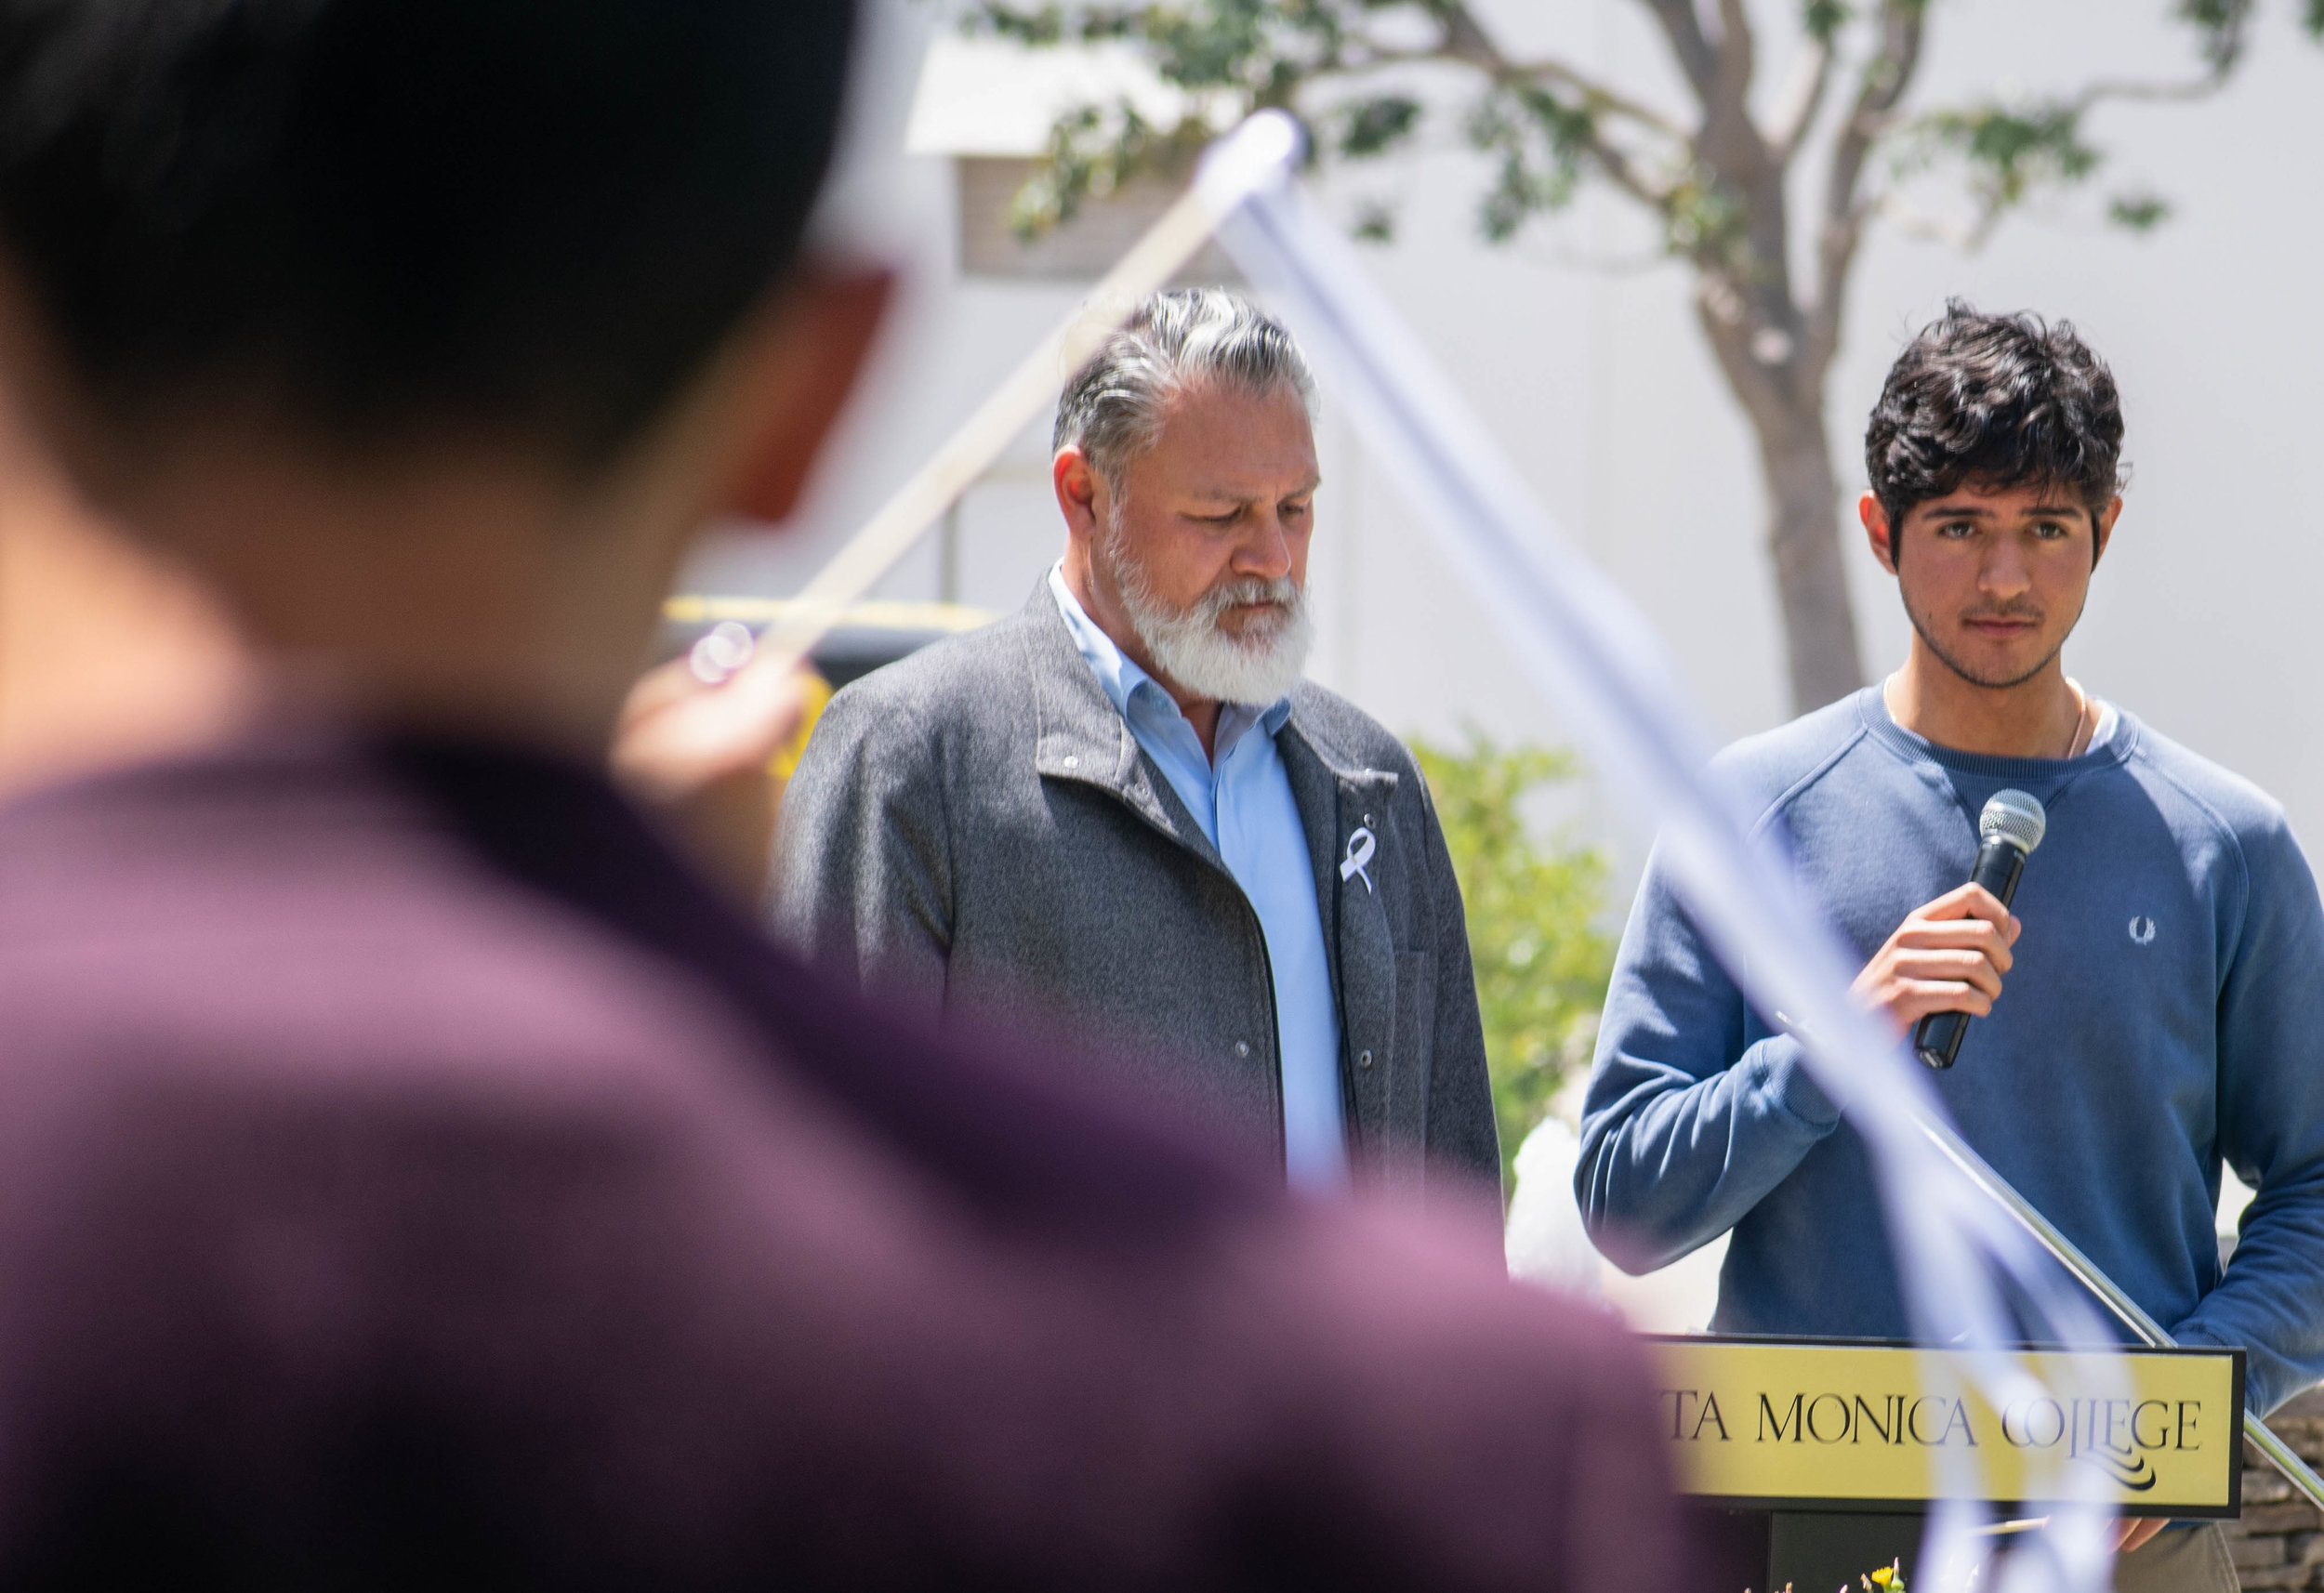  Mike Tuitasi, left, Vice President of Student Affairs at Santa Monica College led a pledge for men on campus such as Orlando Gonzalez, right, to not stay silent about violence towards women students for an event regarding sexual awareness at Santa M